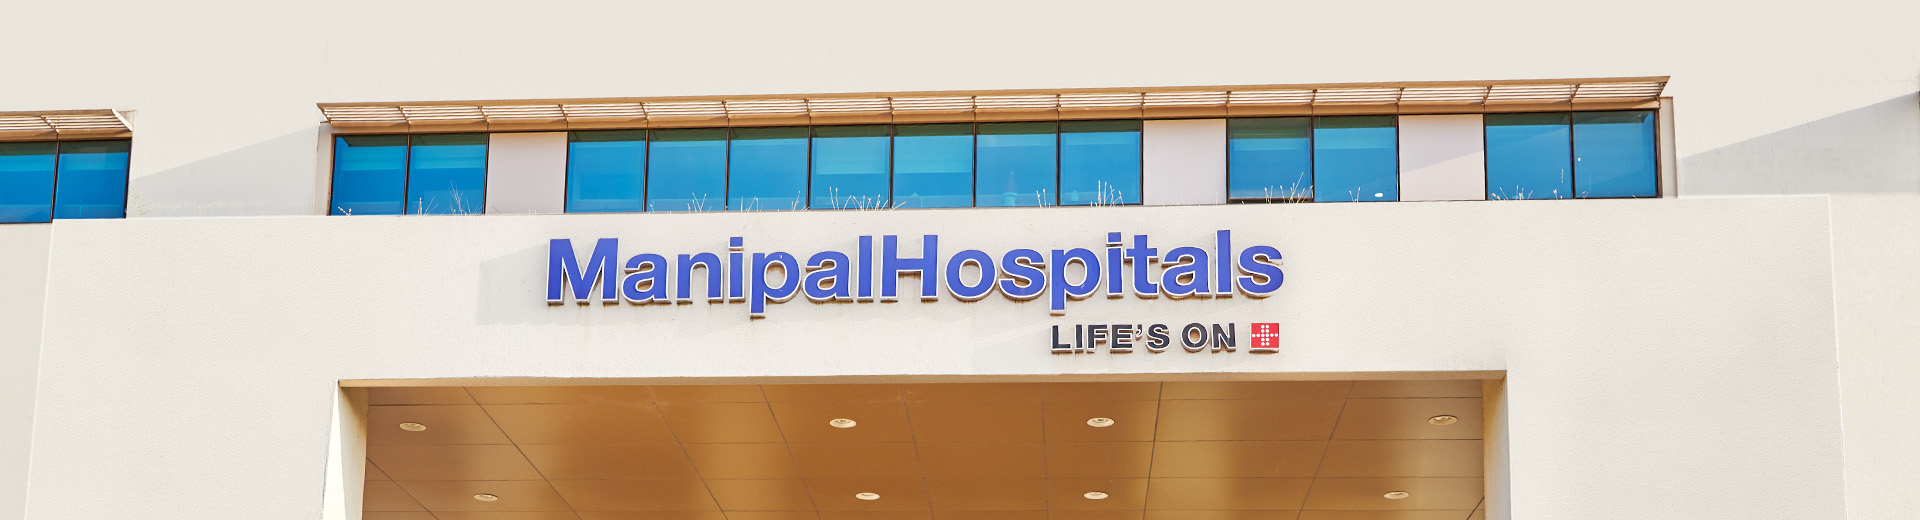 Terms And Conditions - Manipal Hospitals Malleswaram, Bangalore